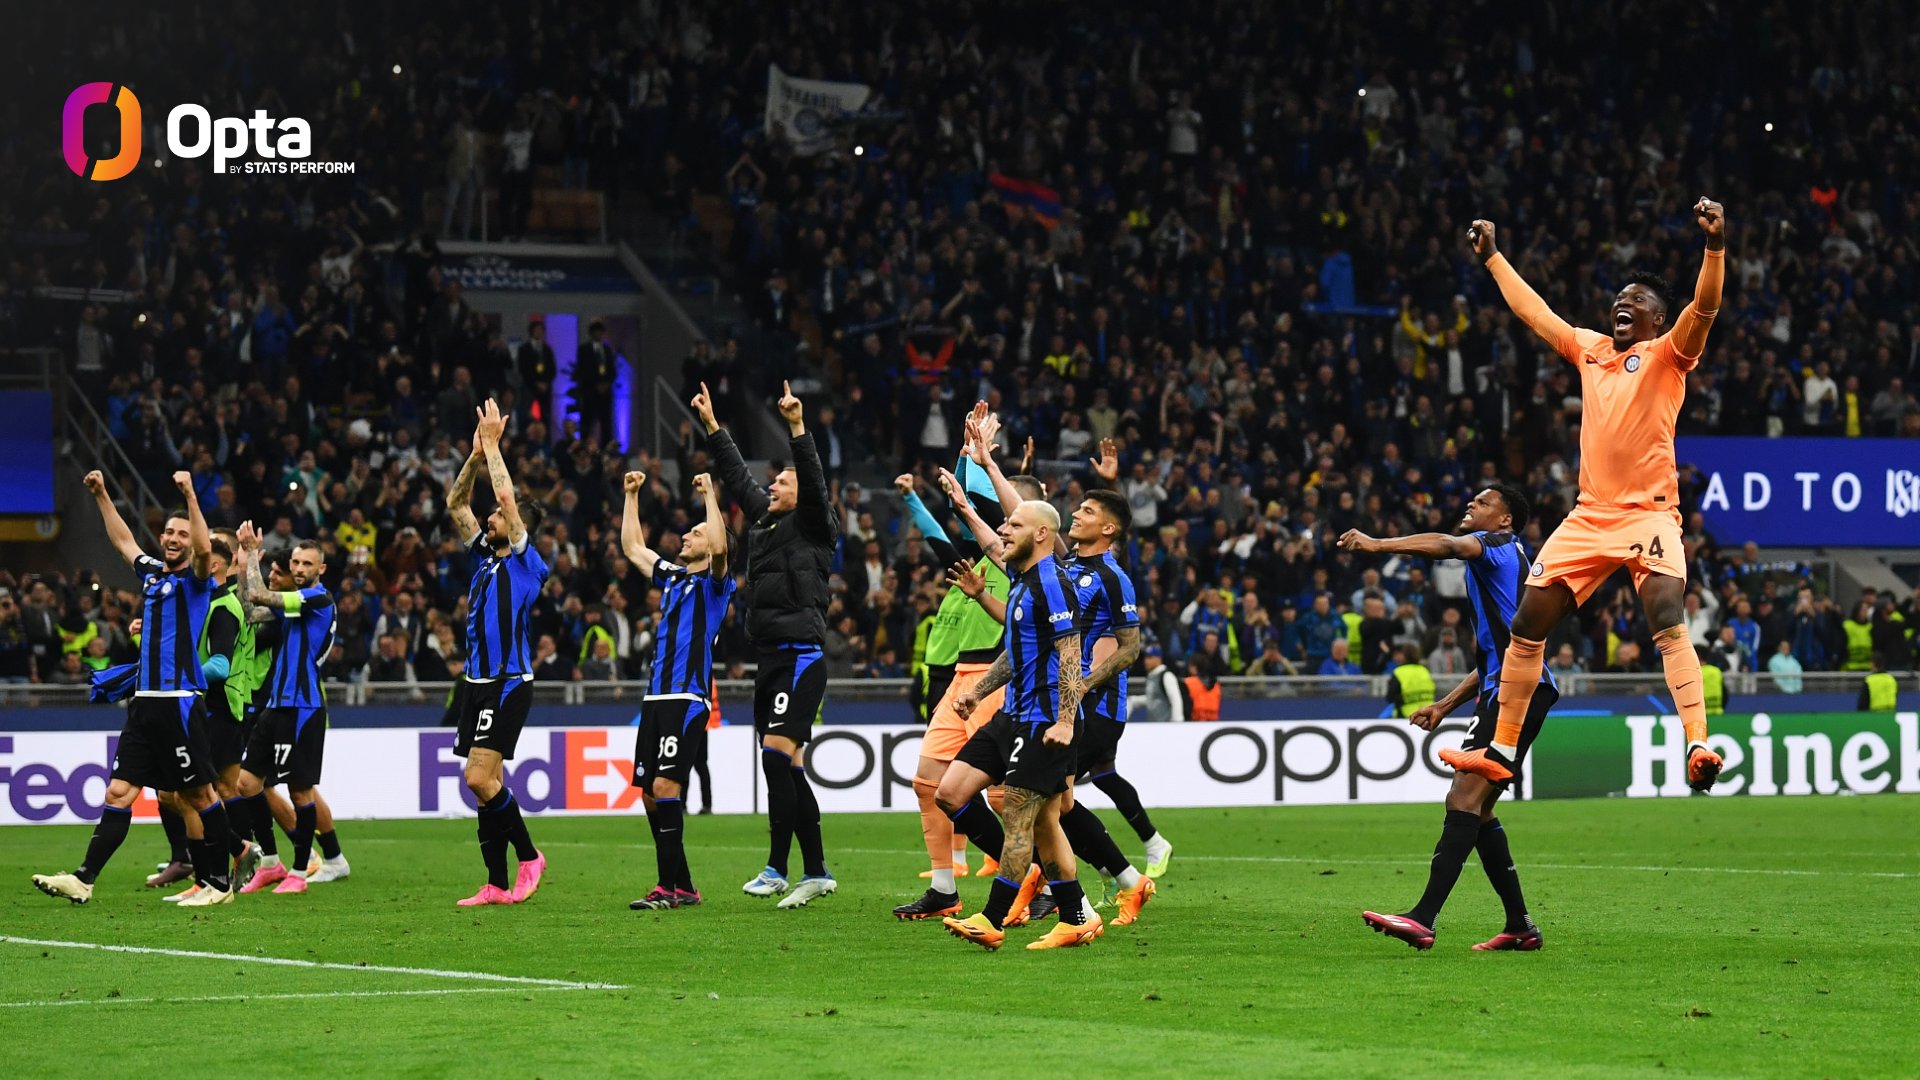 INTER BOOK UCL FINAL AFTER DOUBLE OVER AC MILAN